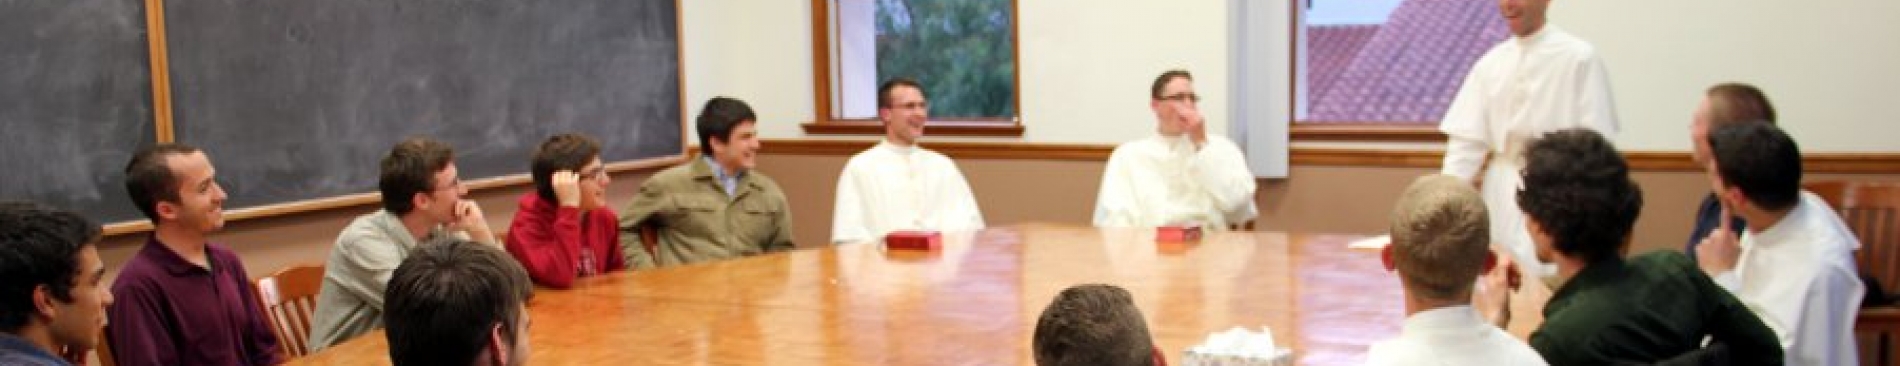 Religious Communities Meet with Students